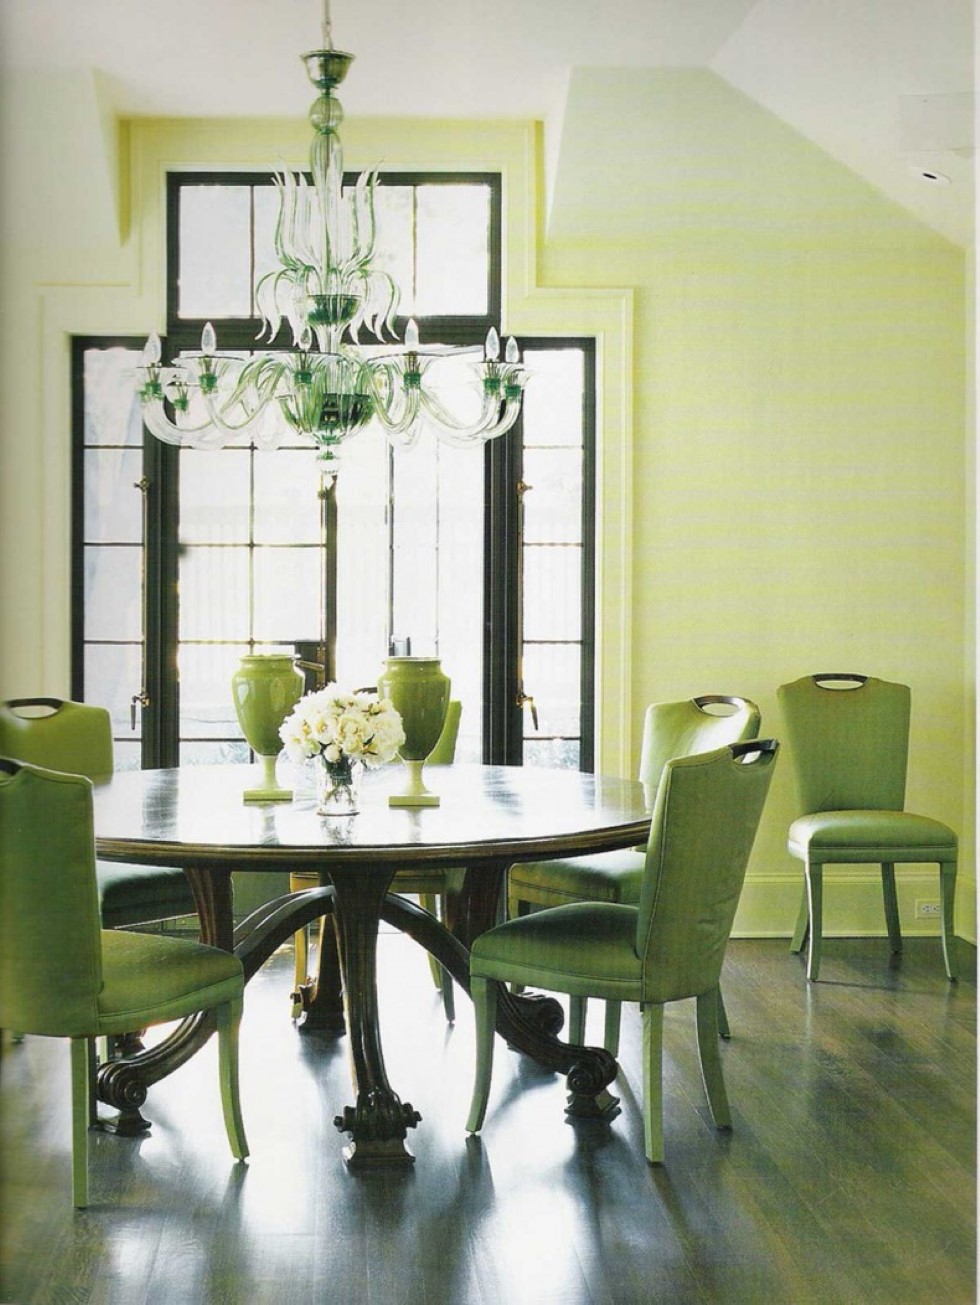 Upholstered Chairs Unusual Green Upholstered Chairs Design Also Unusual Chandelier Feat Chic Dining Room Paint Color Idea Plus Big Round Table Dining Room Marvelous Dining Room With Chic Paint Color Schemes